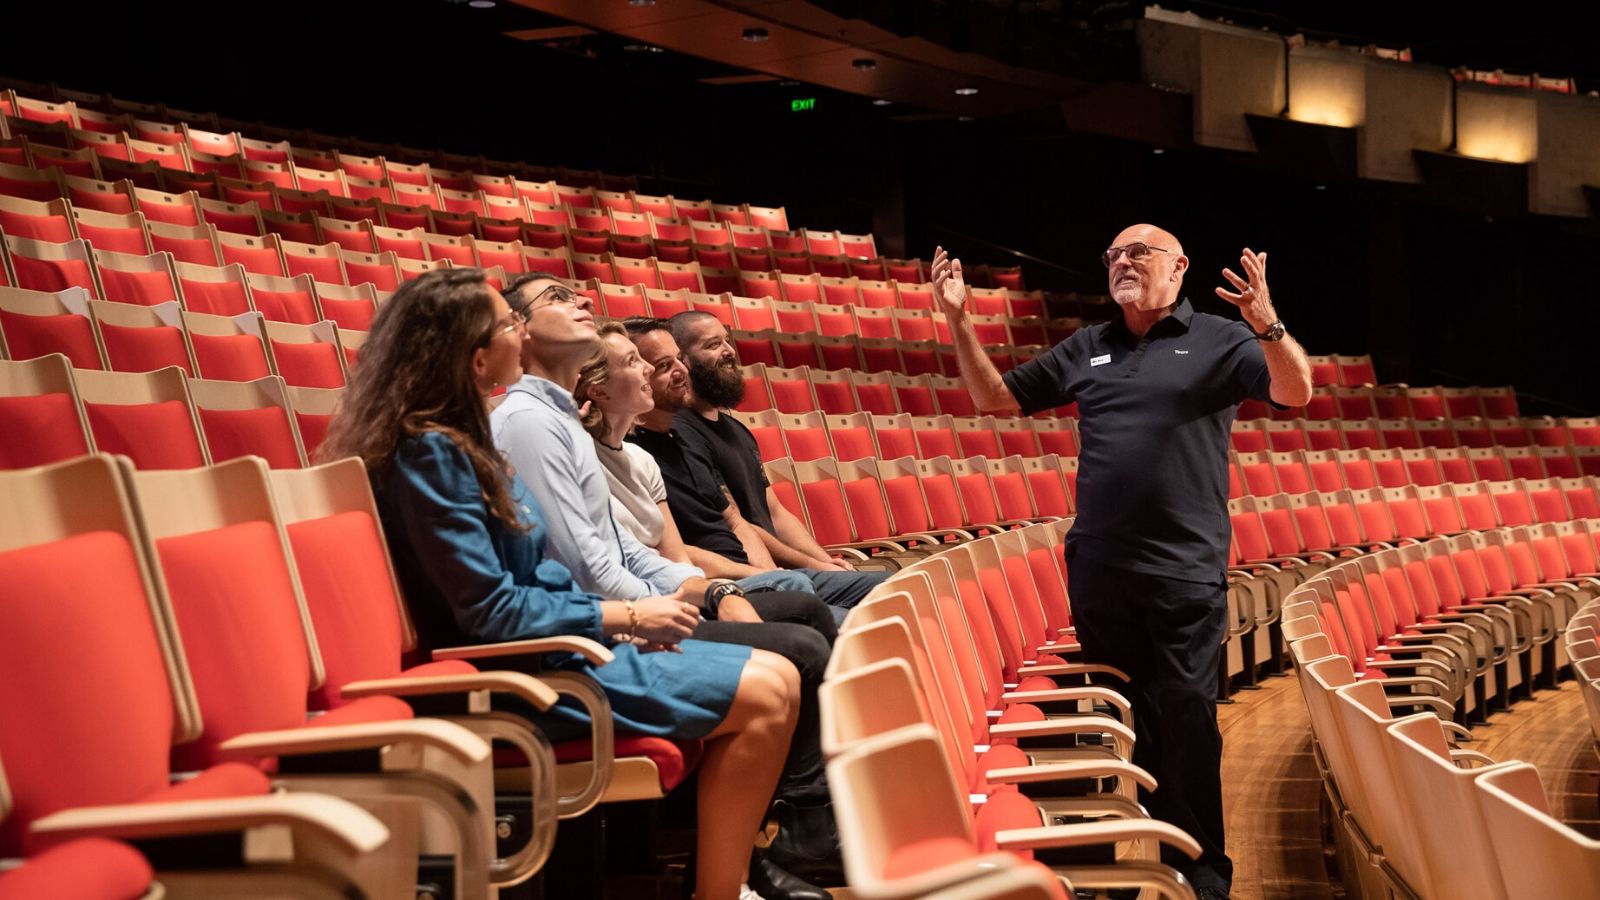 A tour guide showing the Concert Hall.